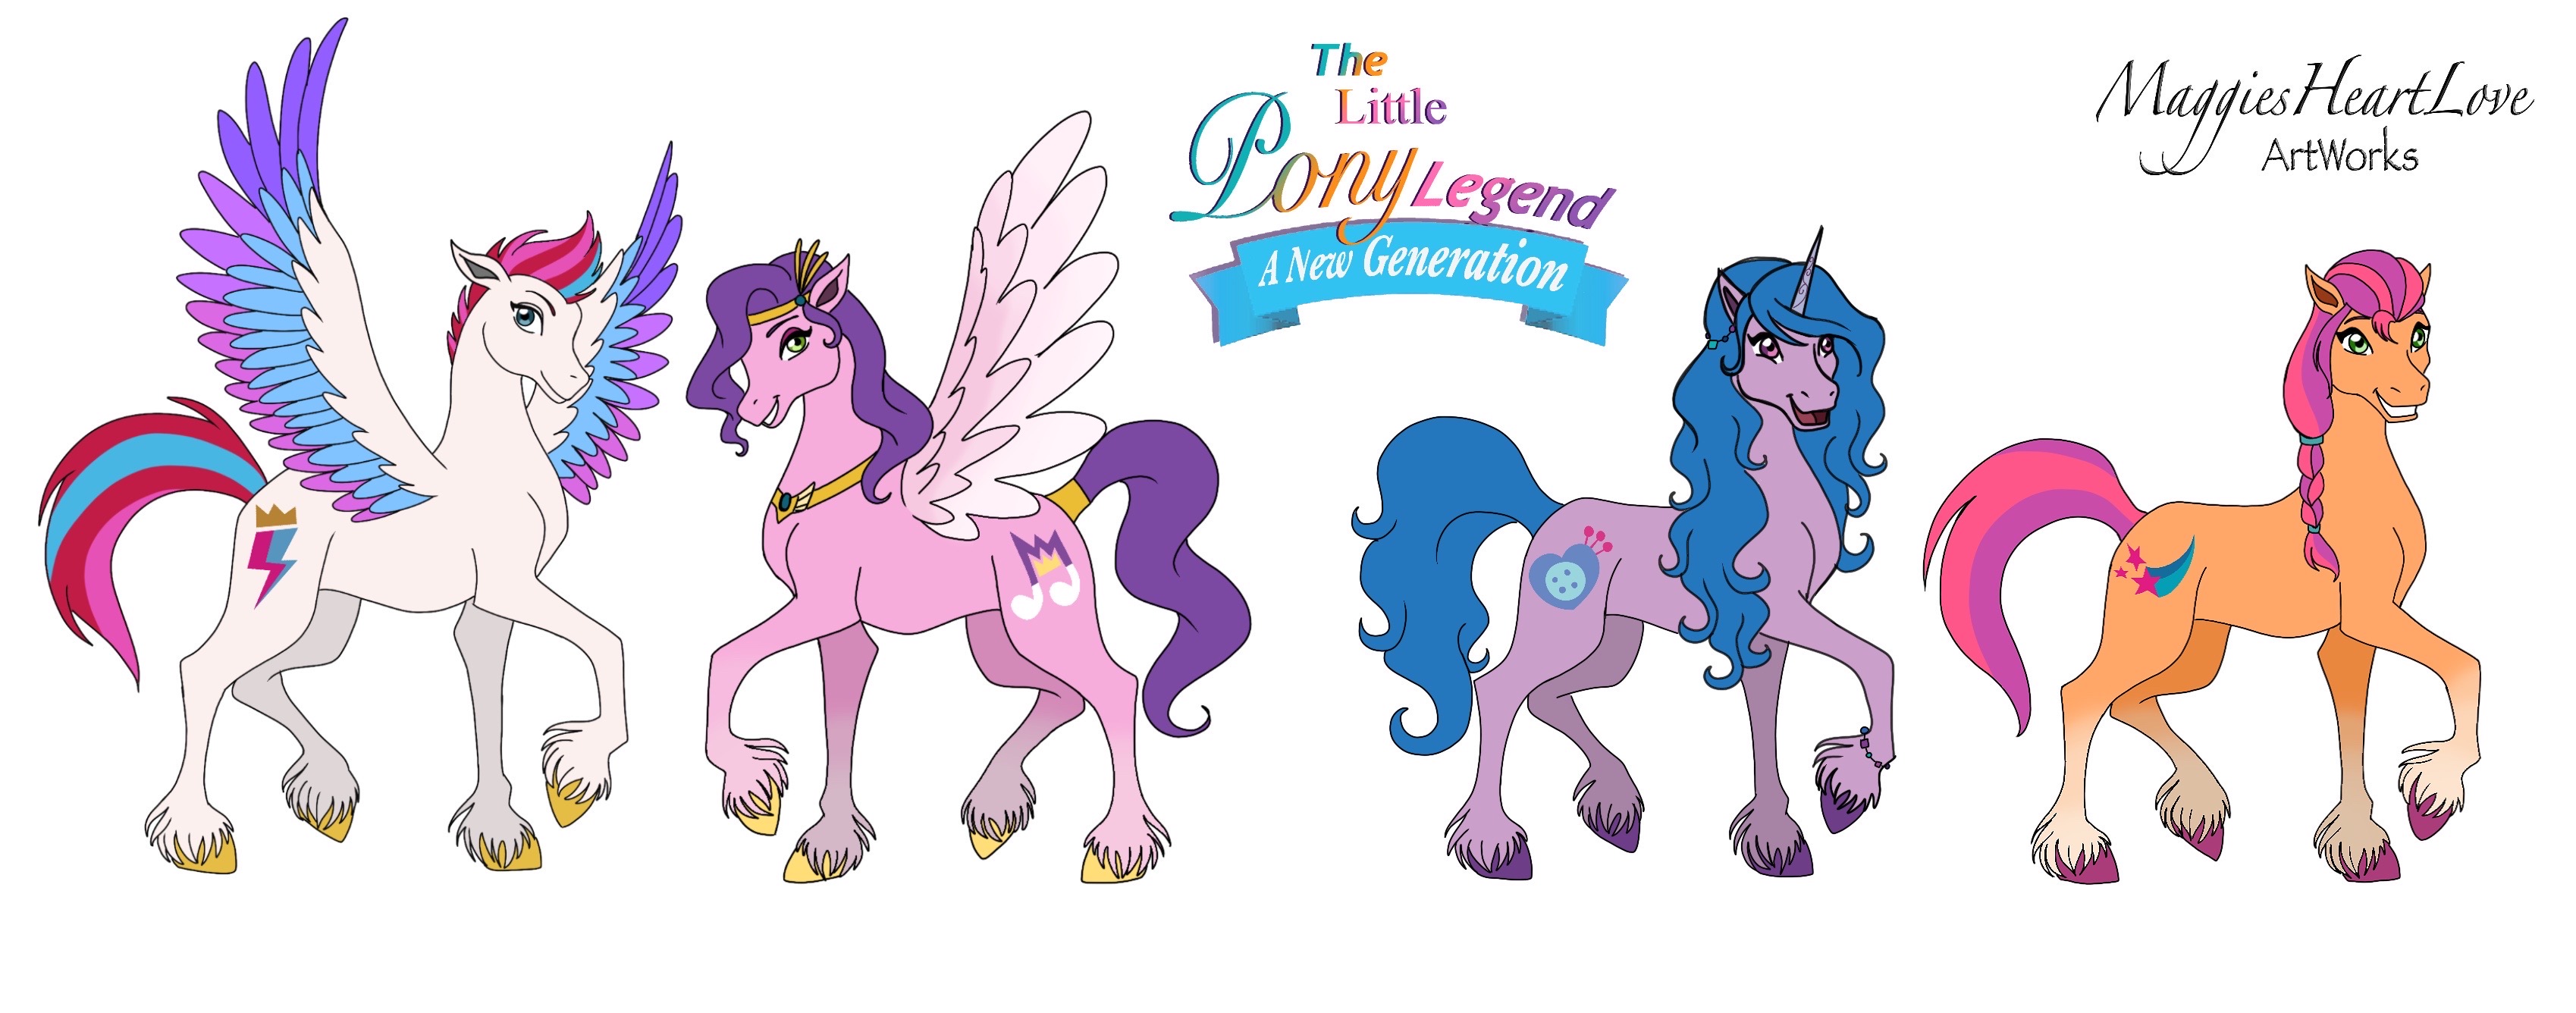 OFFICIAL CAST  My Little Pony: A New Generation [HD] 